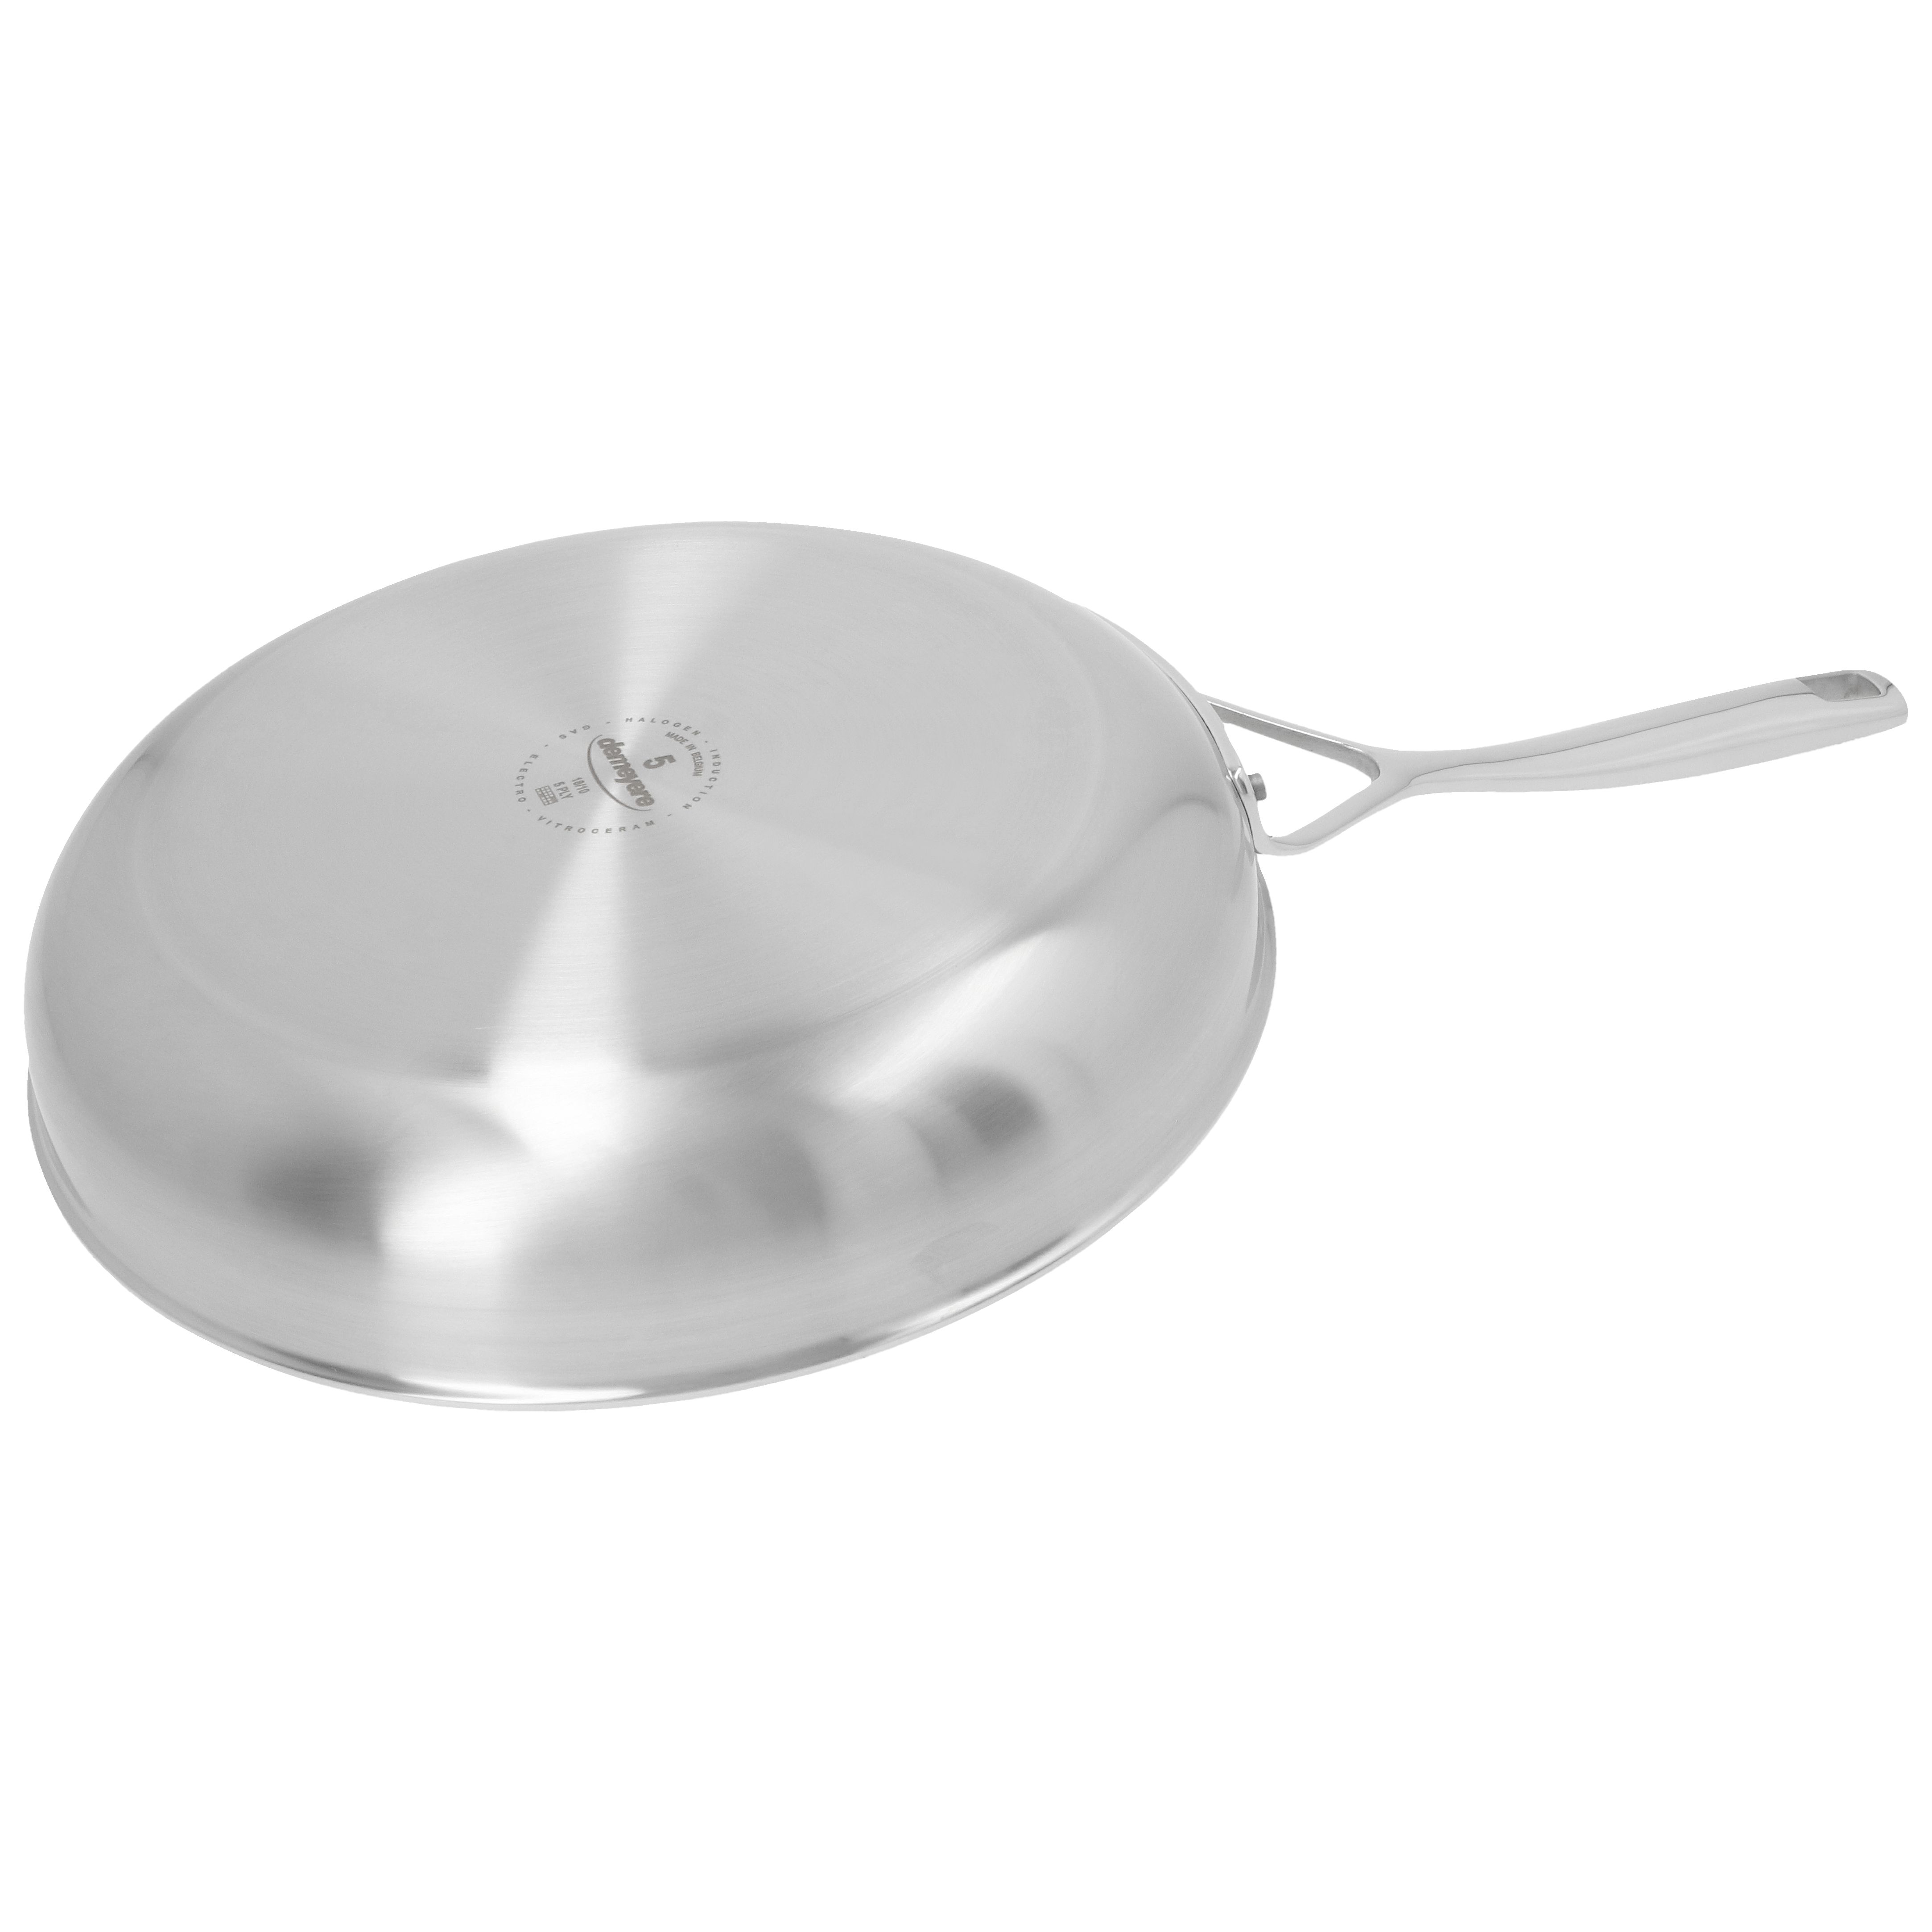 Demeyere Industry 5-Ply Stainless Steel Fry Pan, 11-inch and 9.5-inch on  Food52